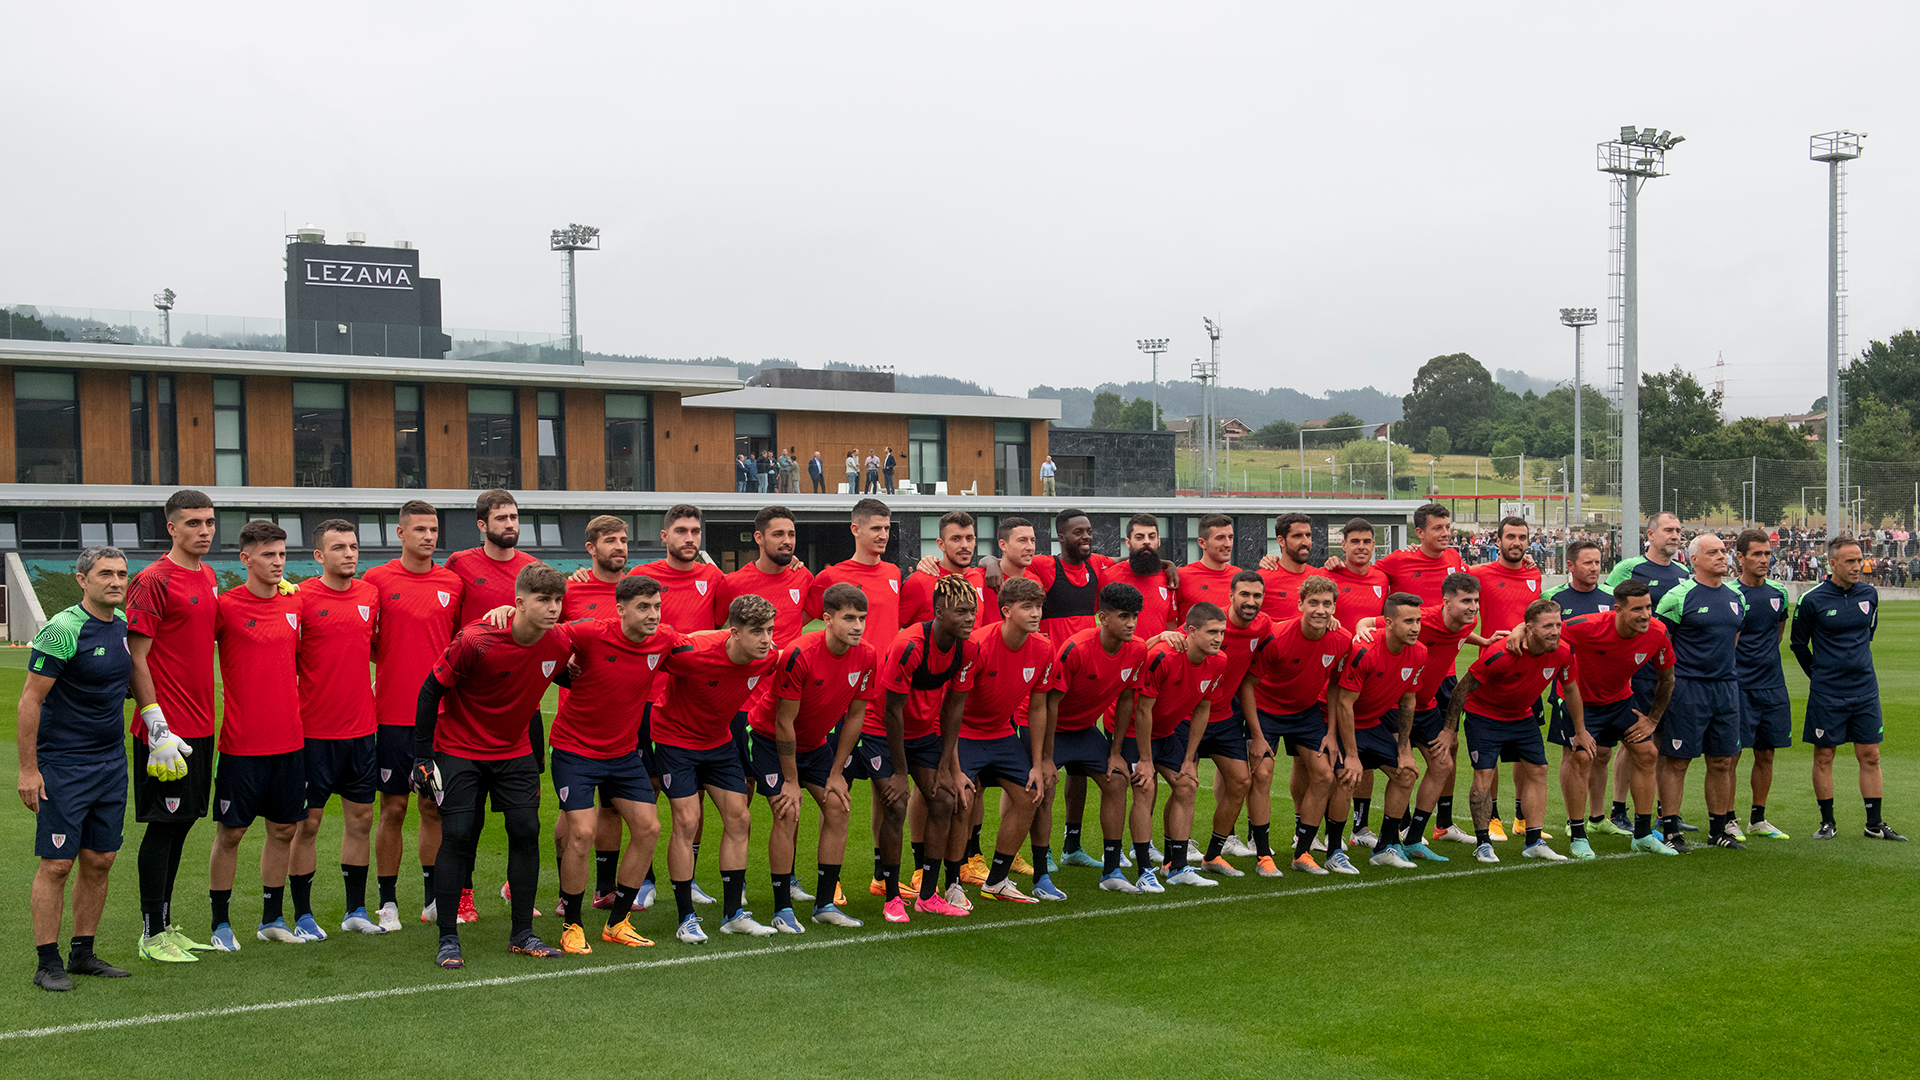 First training session of the pre-season